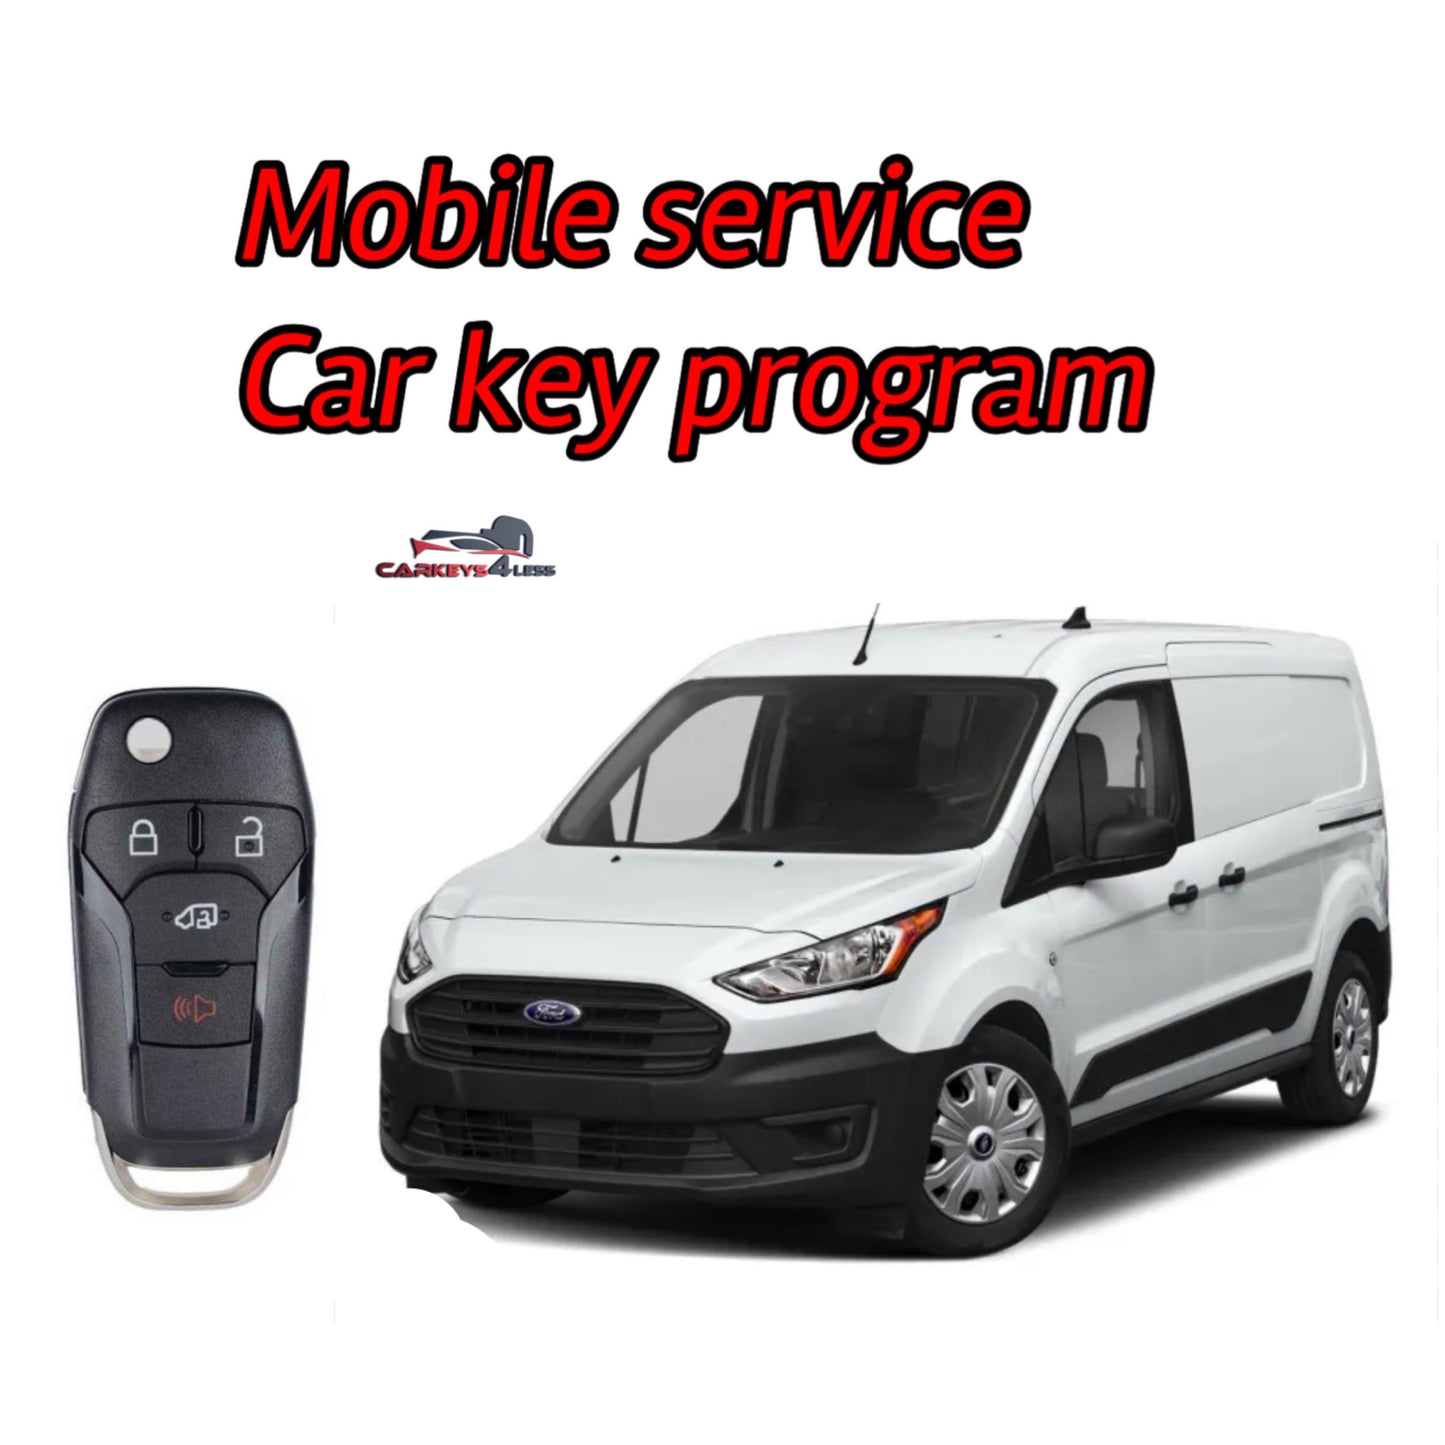 Mobile service for an aftermarket ford key replacement